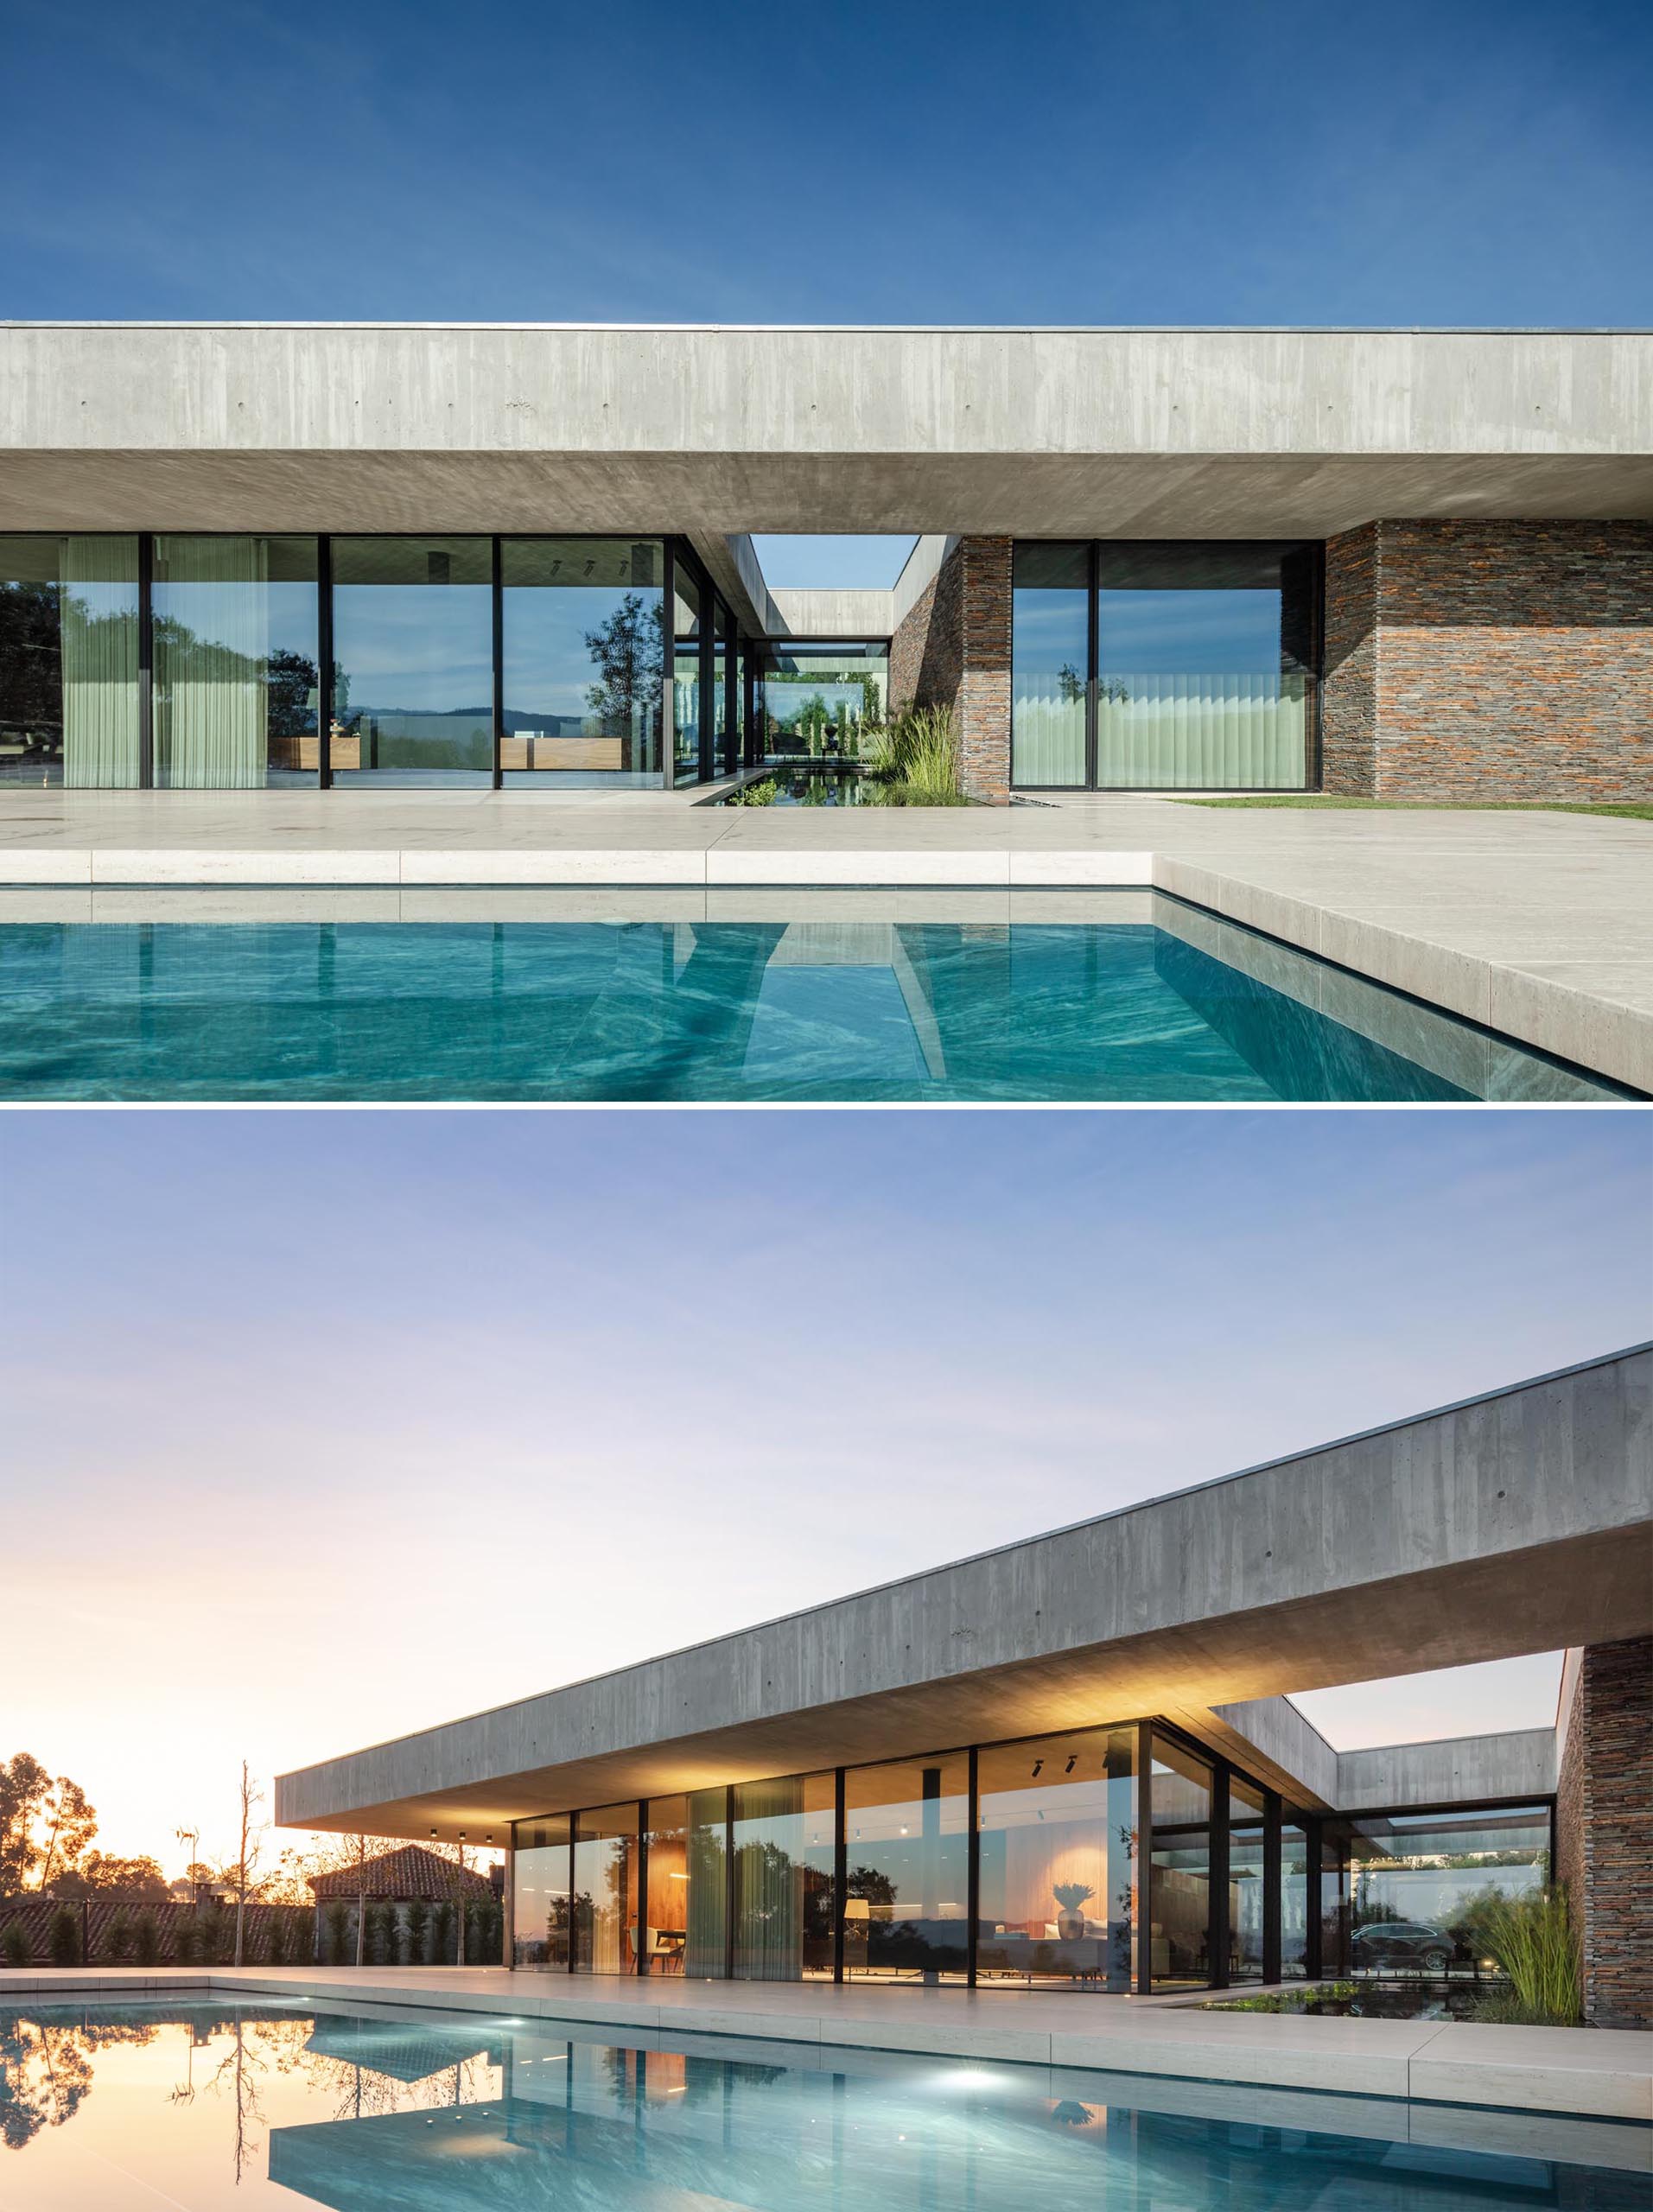 A modern concrete home with glass walls, an expansive patio, and a swimming pool.